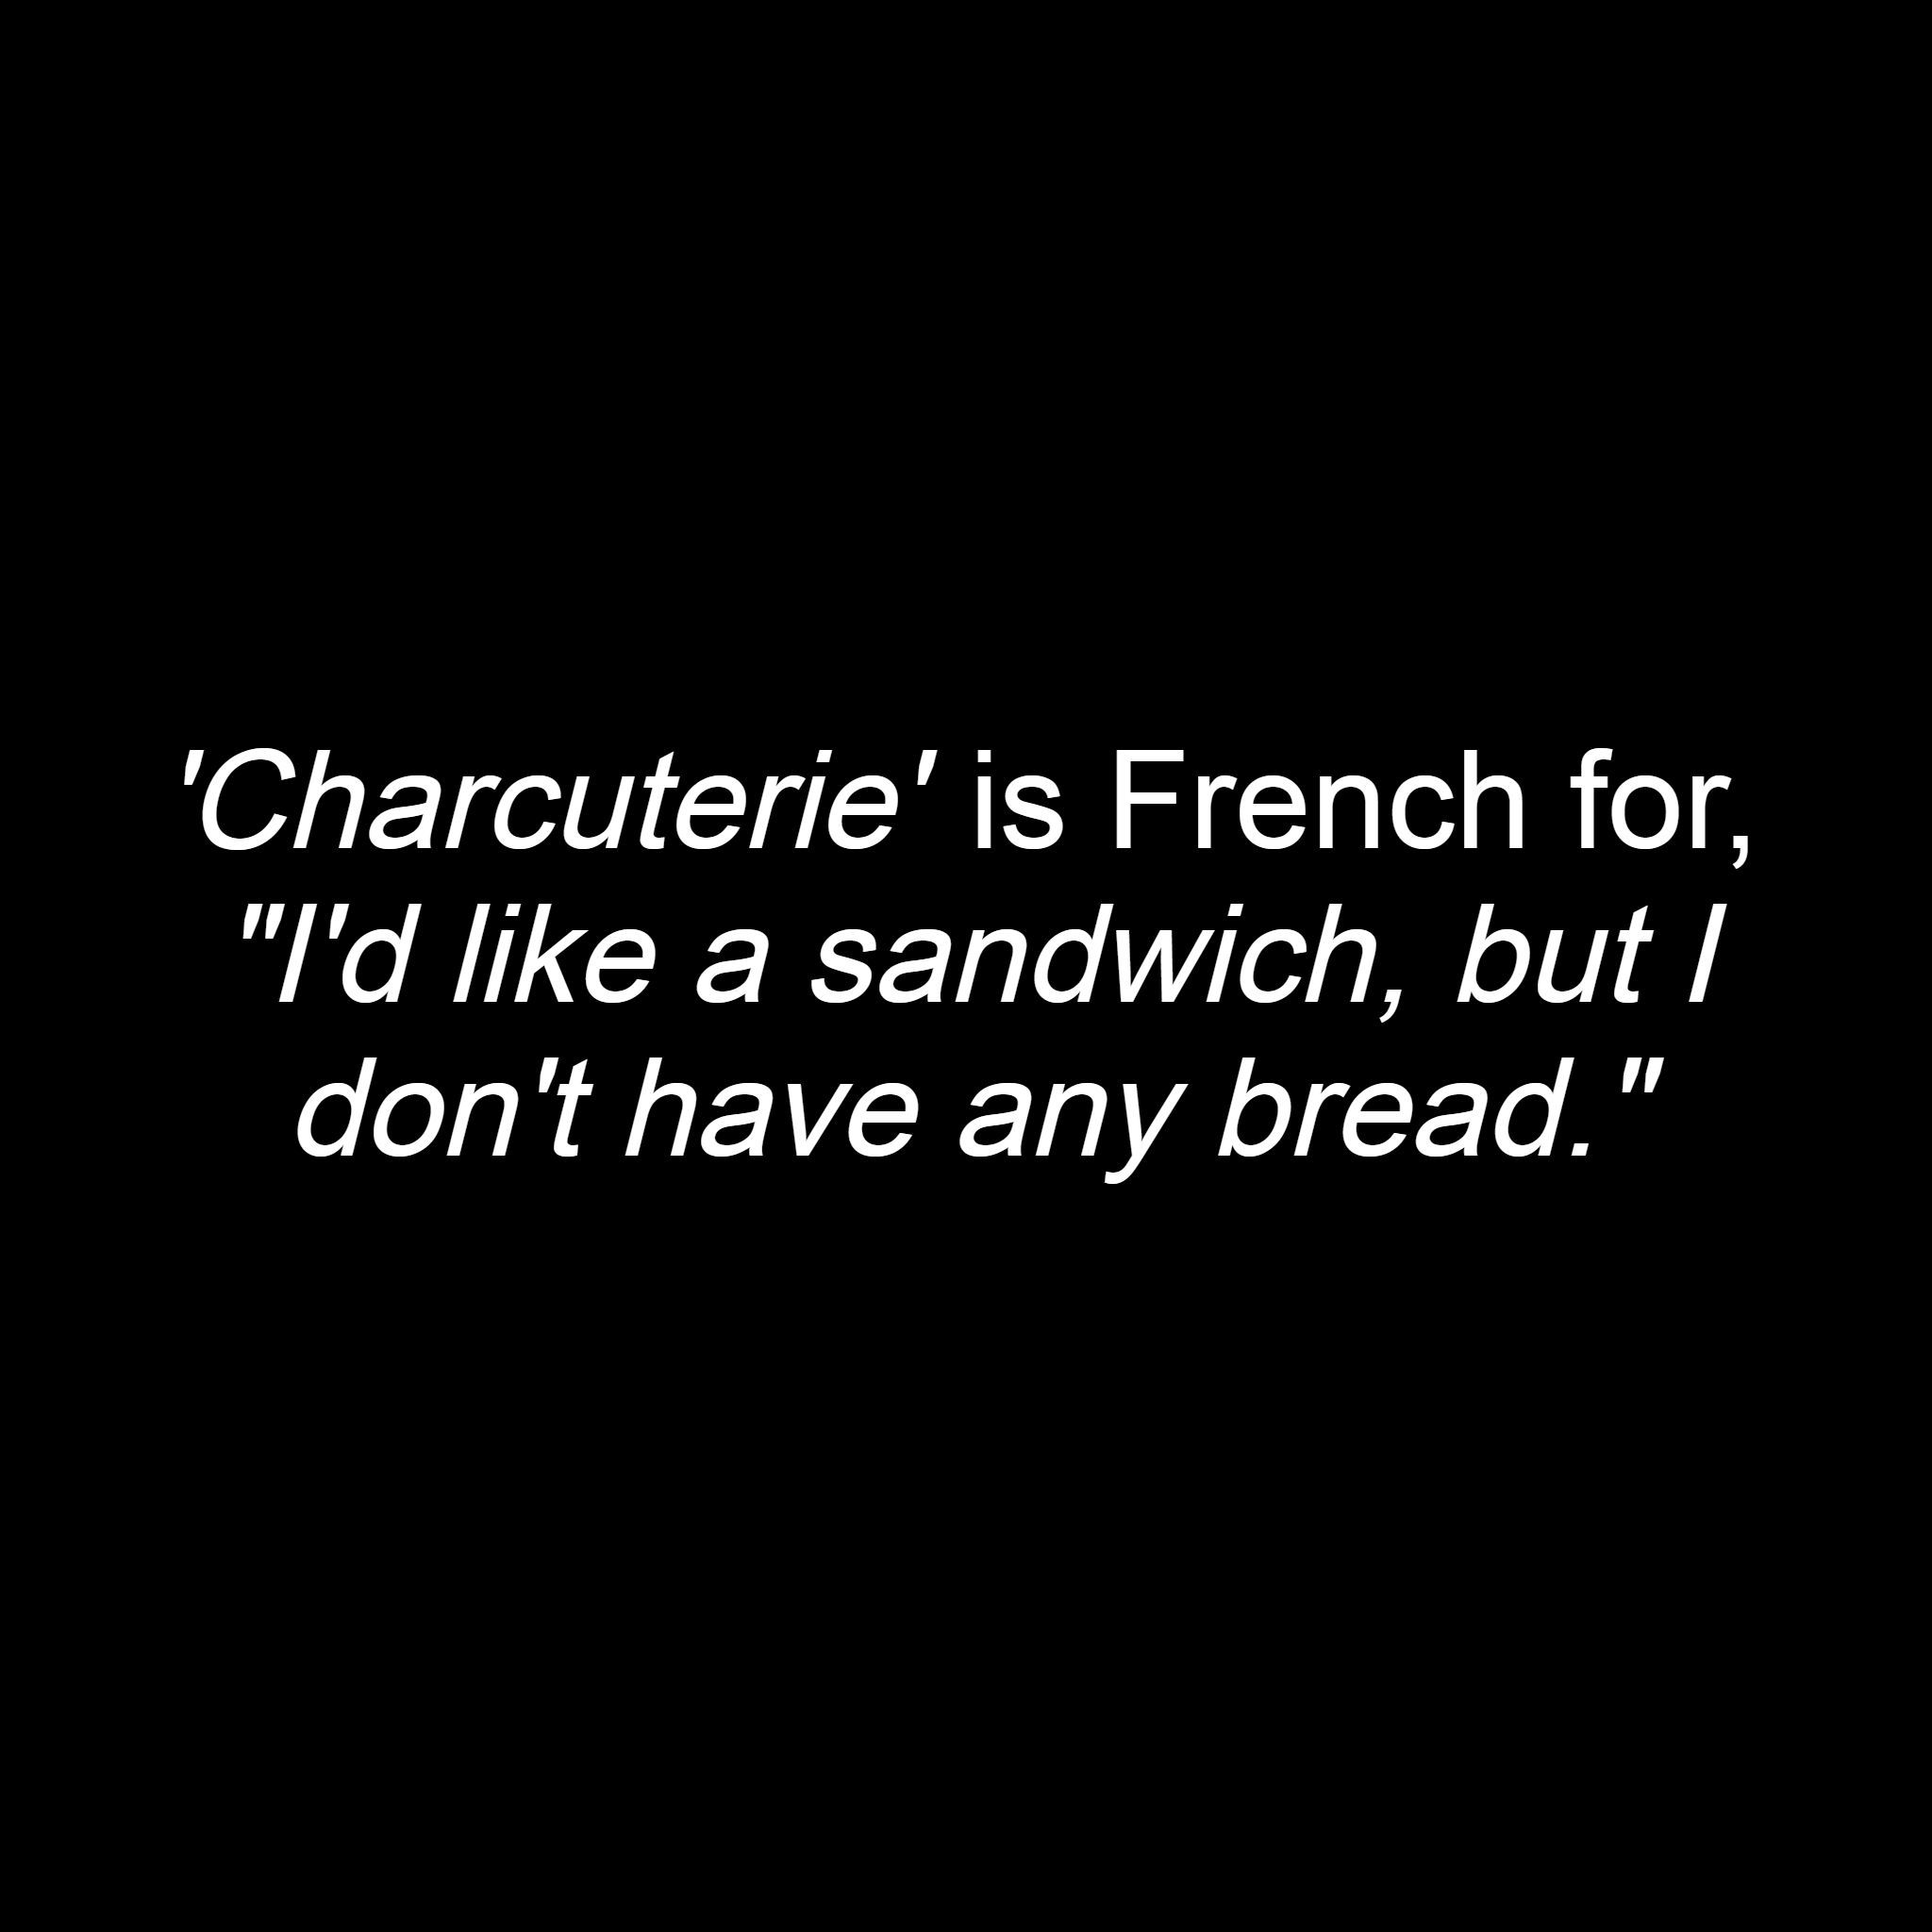 Charcuterie is French for…